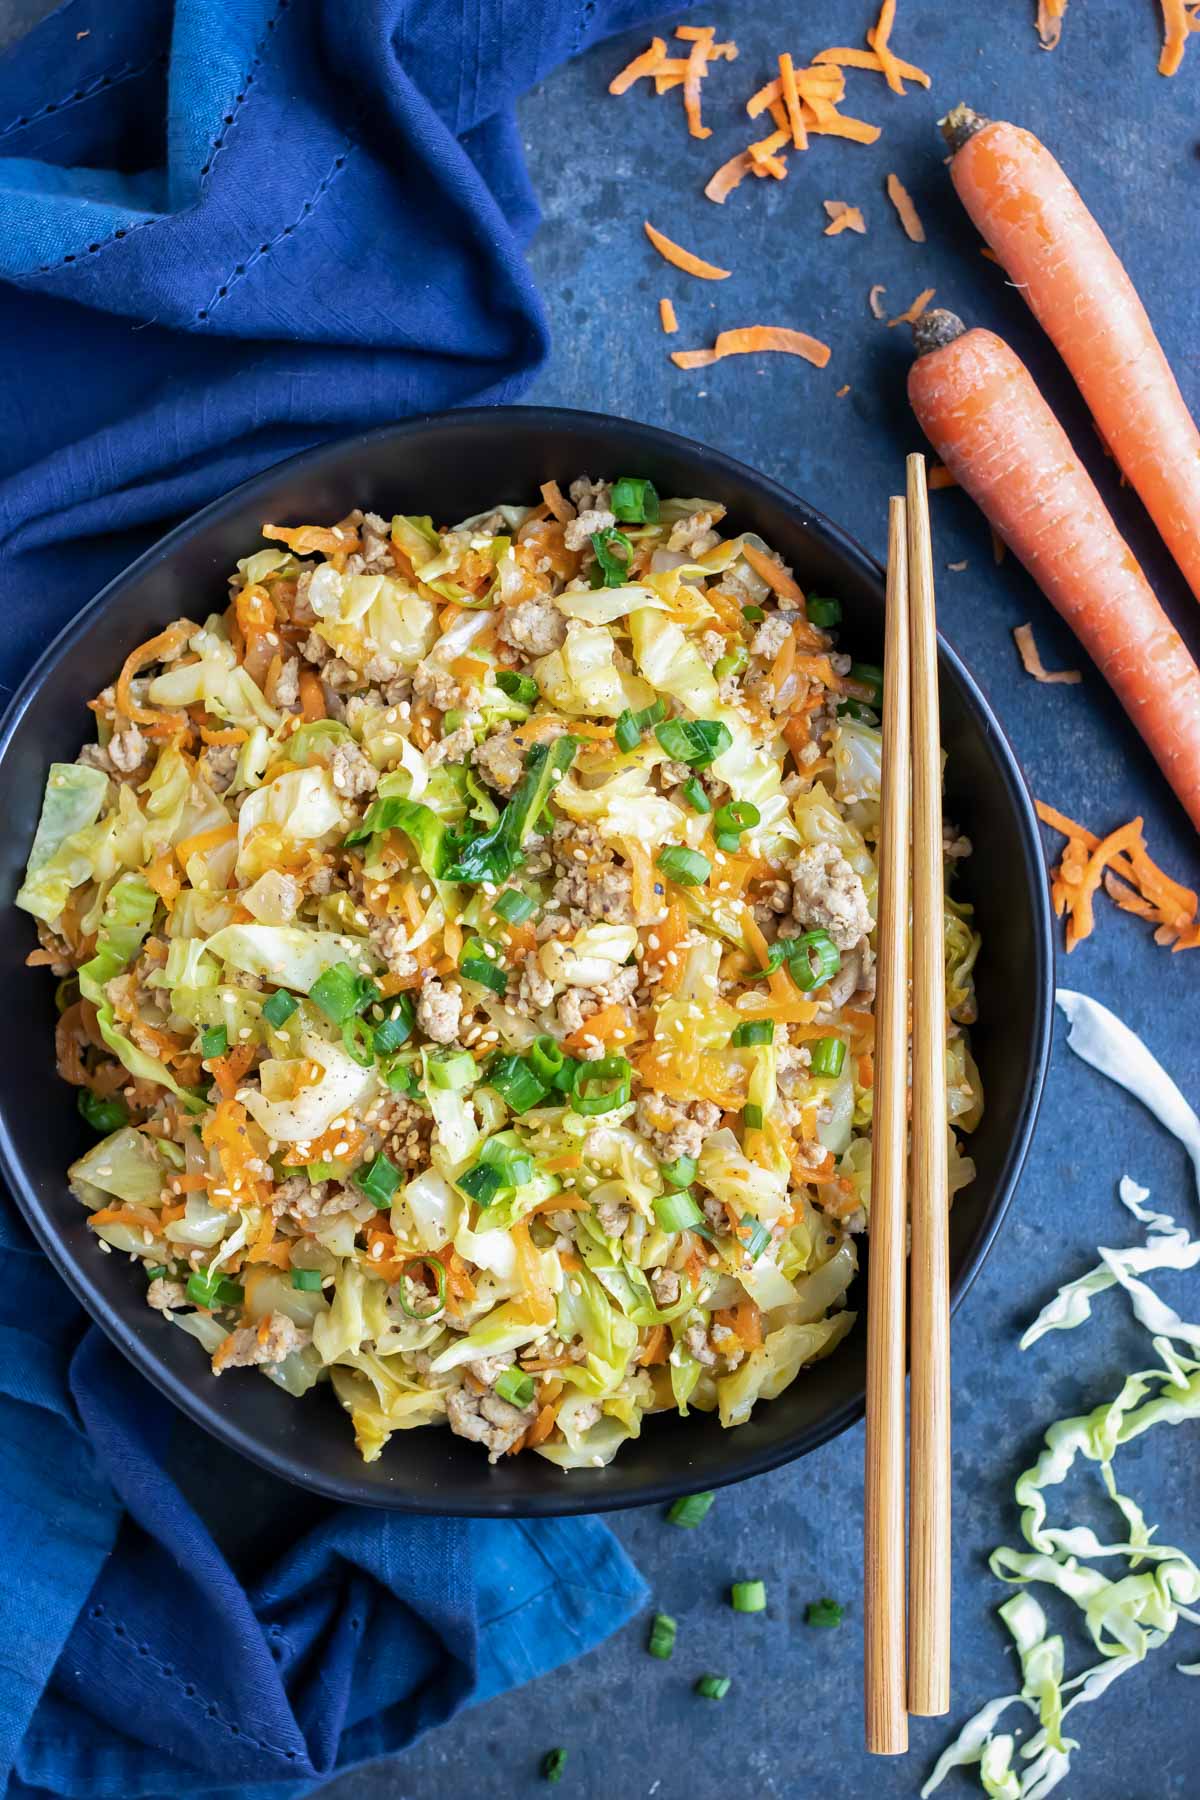 Keto and Paleo egg roll in a bowl dinner recipe with chopsticks and a blue napkin.